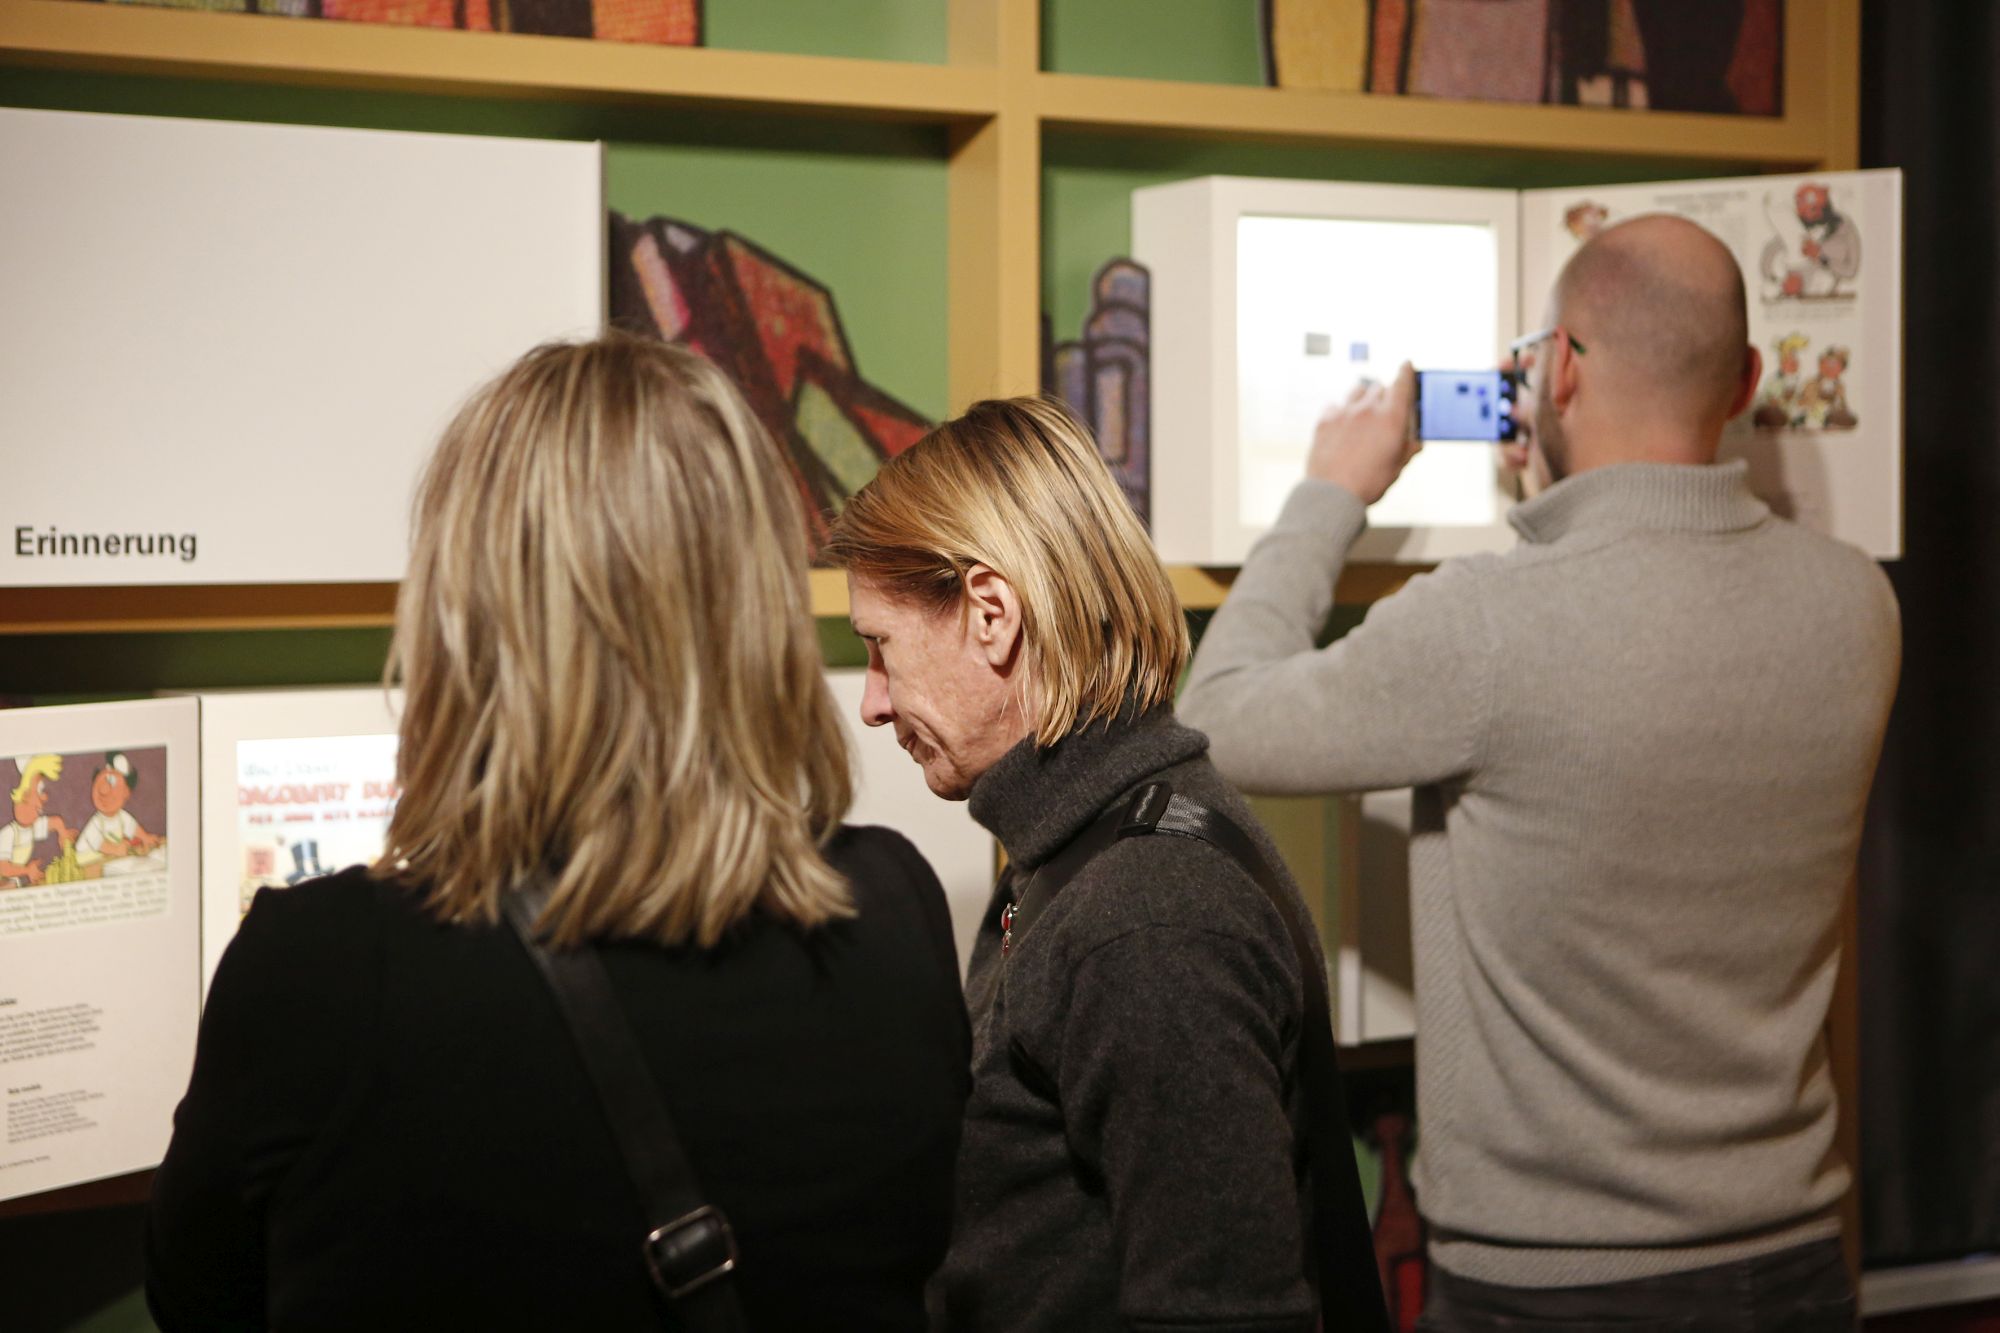 Visitors in the exhibition